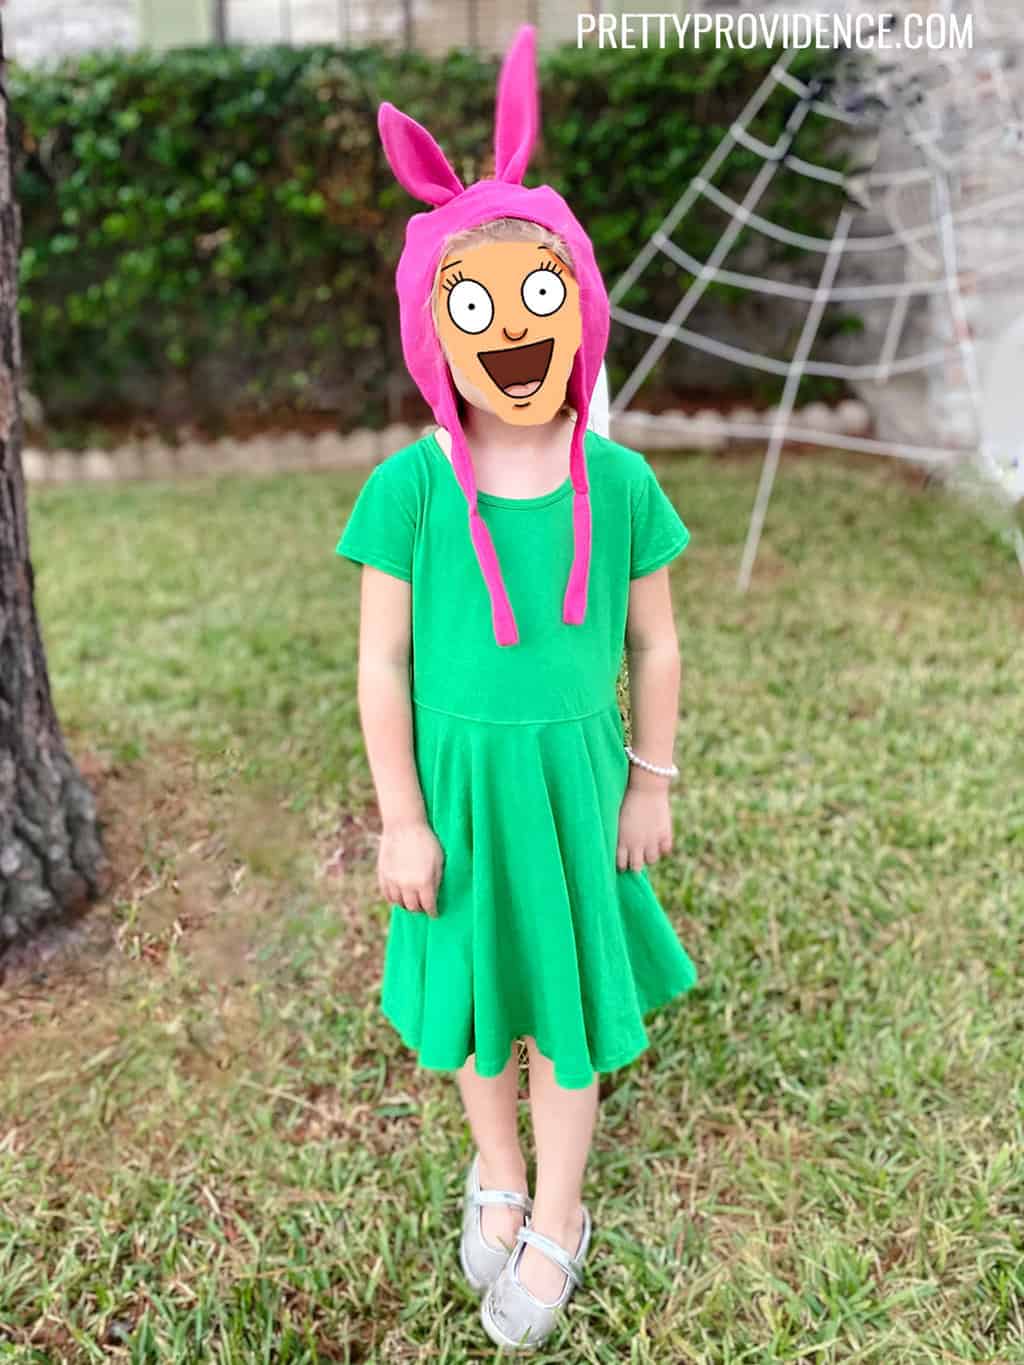 A kid dressed as Louise from Bob's Burgers wearing a green dress and a pink bunny ear hat..